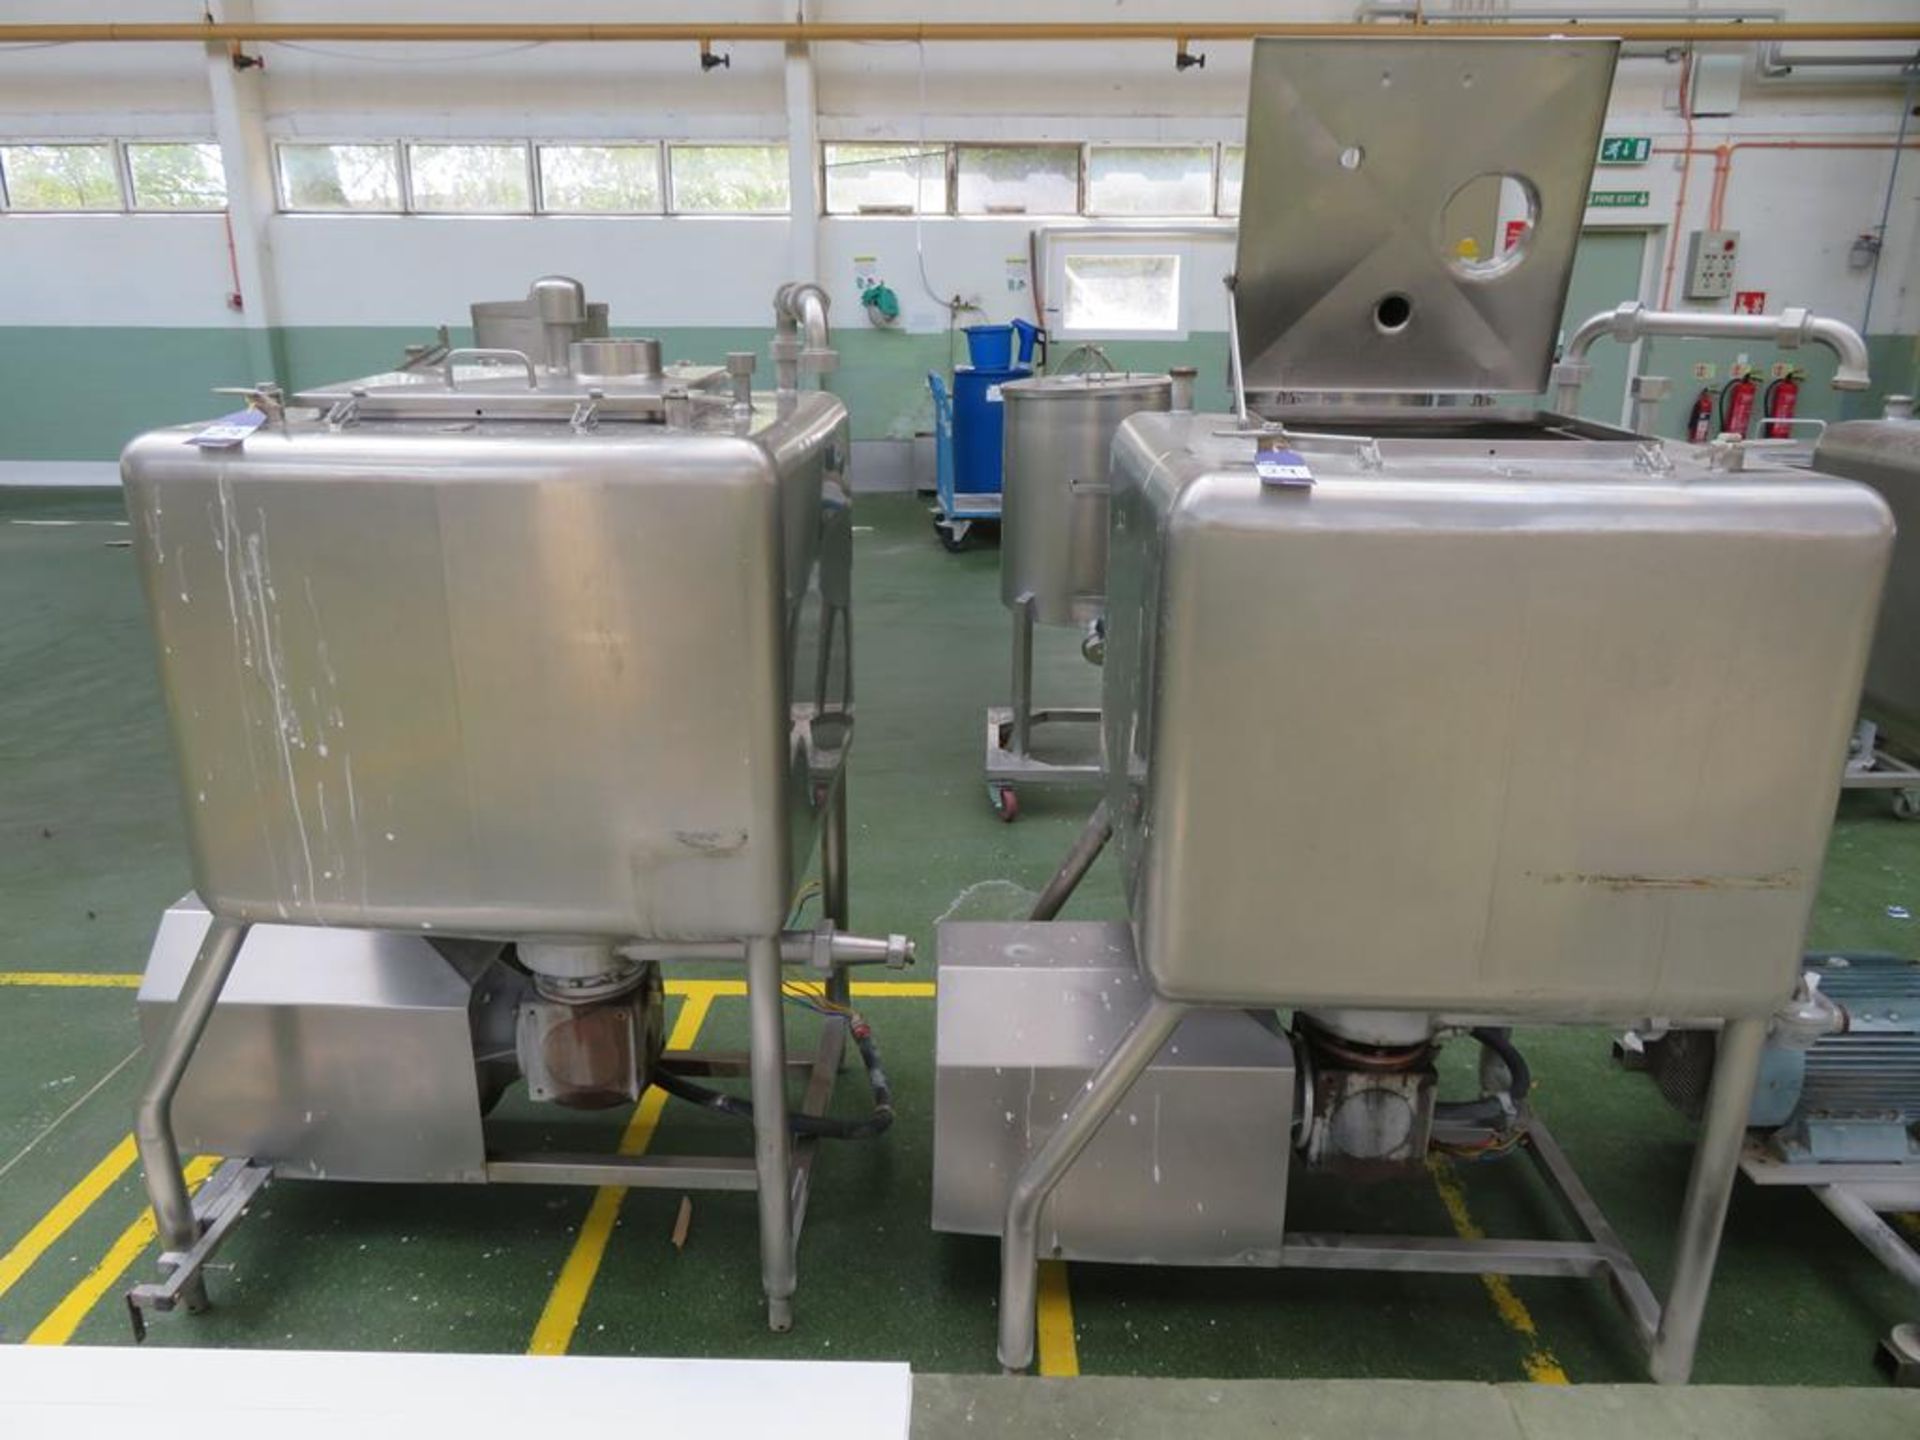 2 x Fat Mixing Tanks with Motor Driven Bottom Blade (900 x 900 x 900 mm deep)